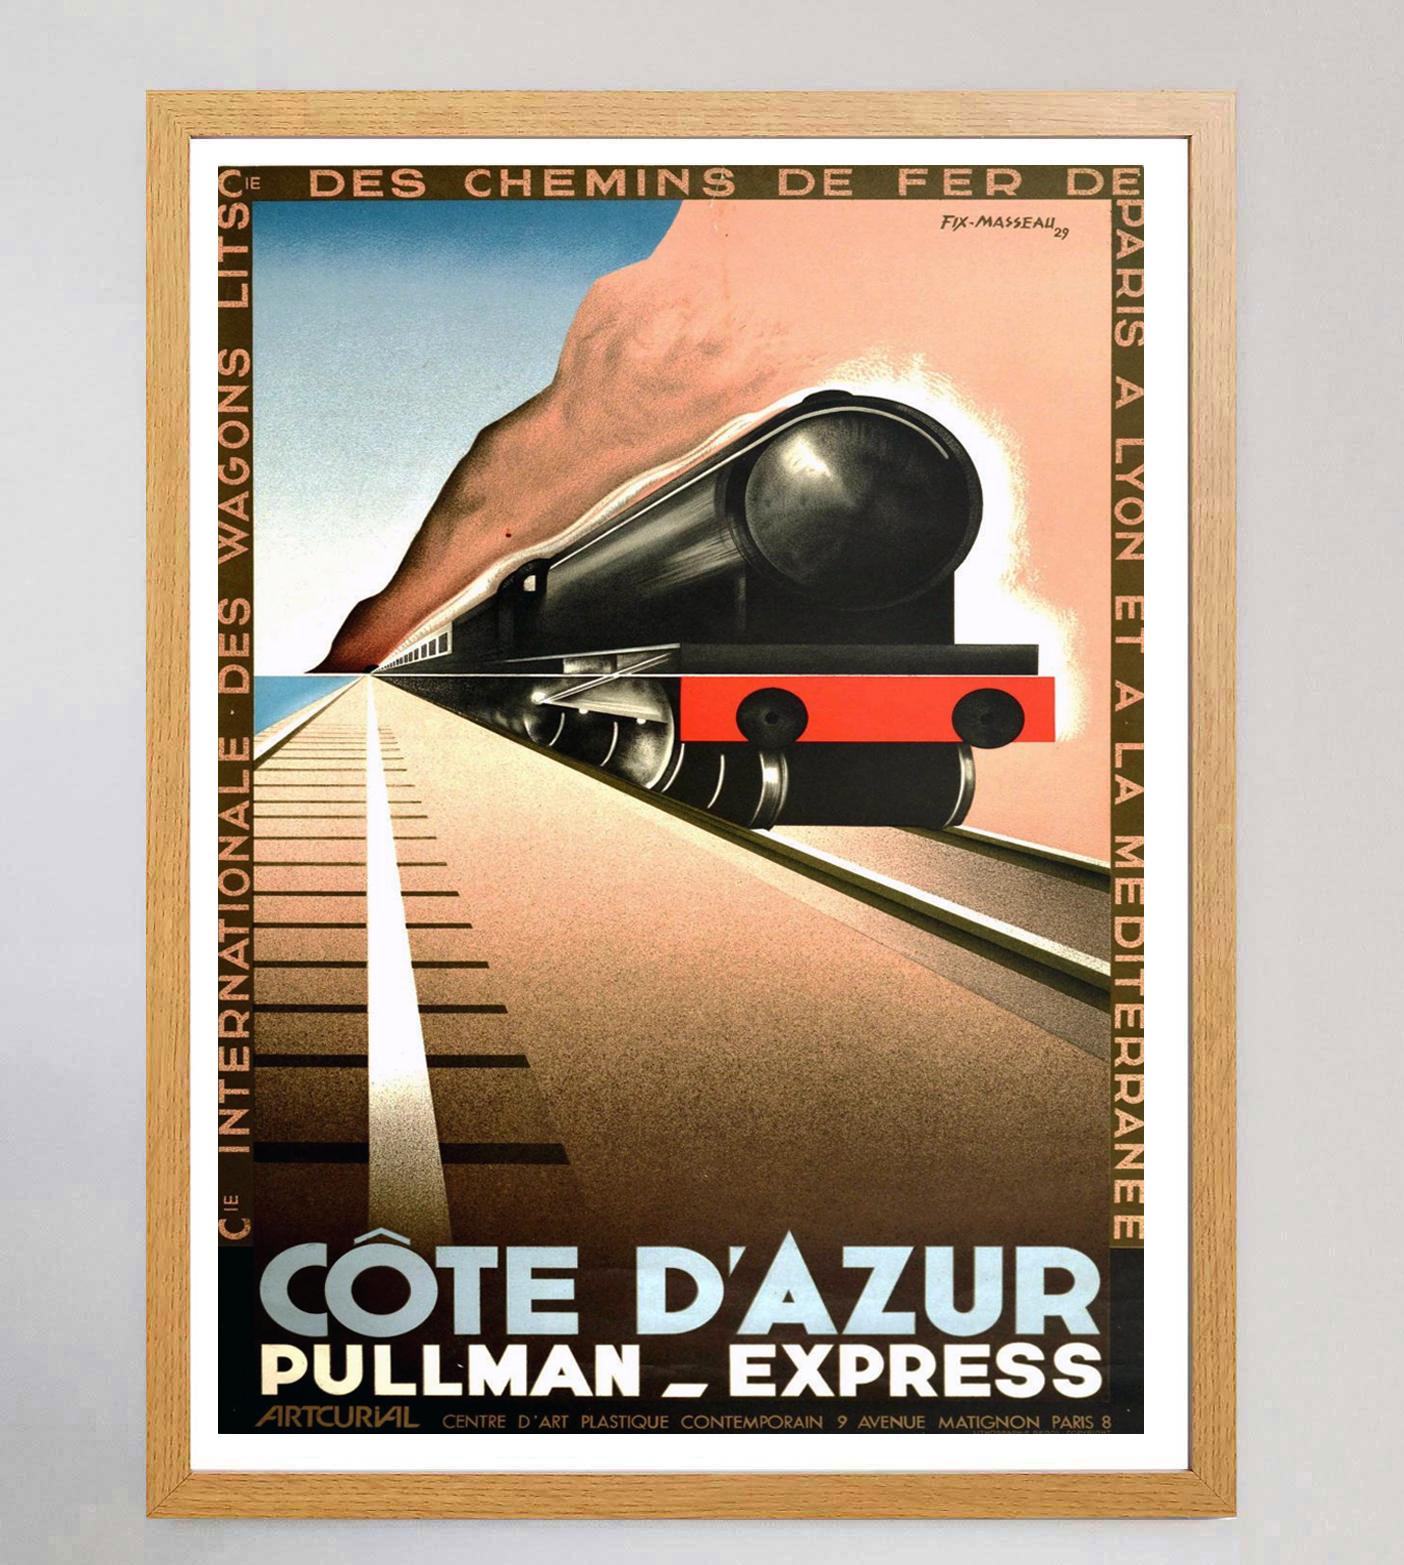 1982 Cote d'Azur - Pullman Express - Fix-Masseau Original Vintage Poster In Good Condition For Sale In Winchester, GB